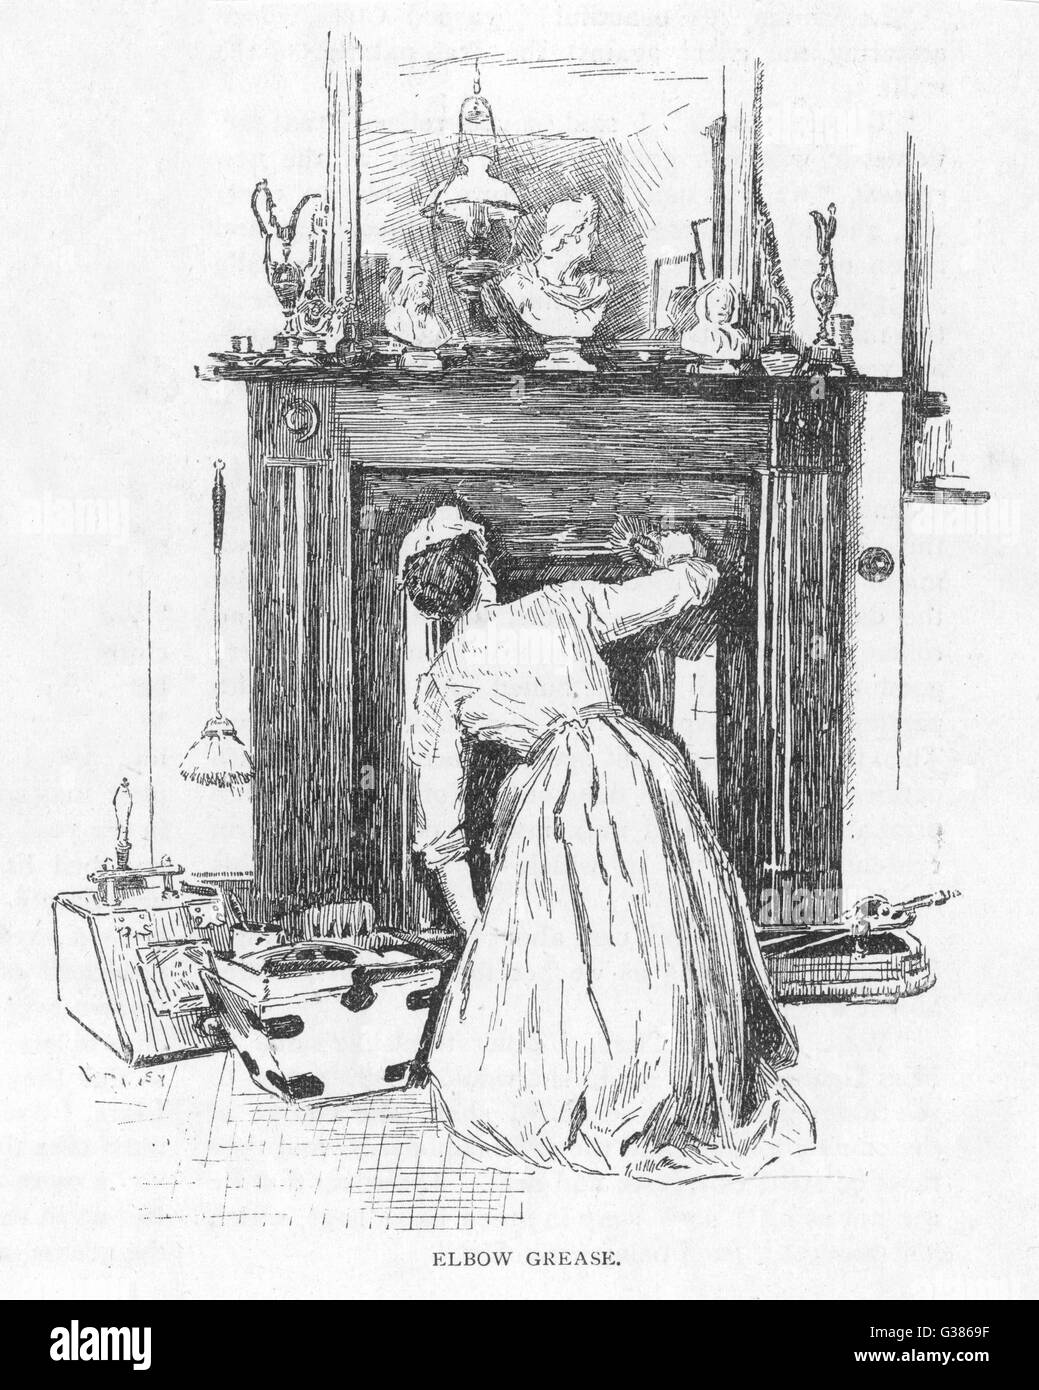 A housemaid on her knees  cleans a grate with black lead and elbow grease        Date: 1893 Stock Photo